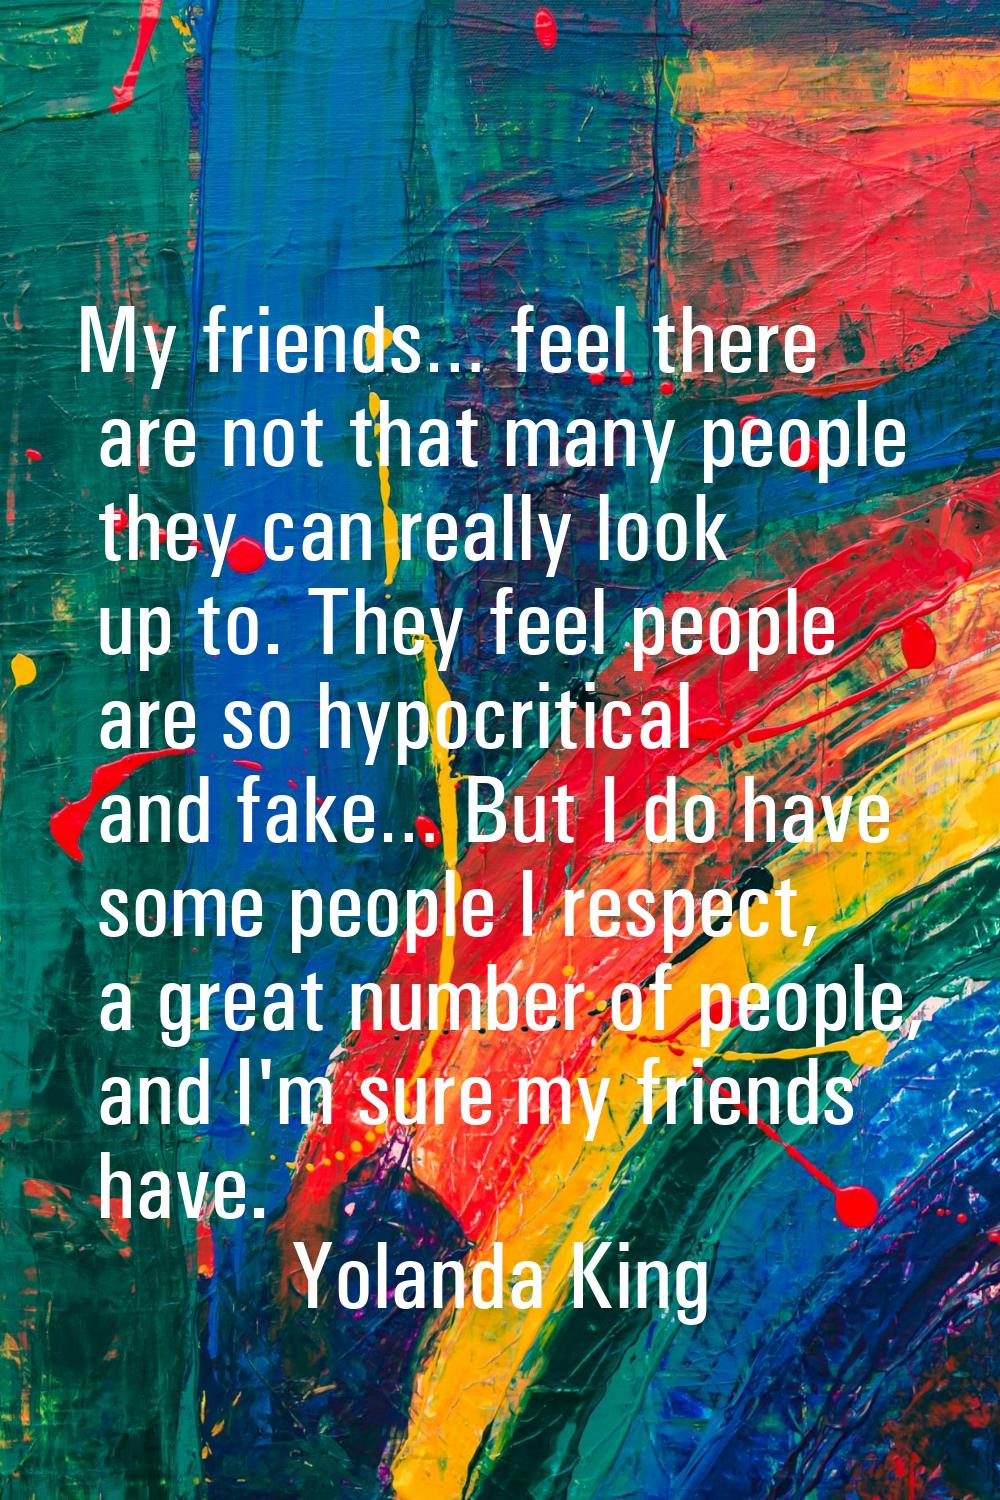 My friends… feel there are not that many people they can really look up to. They feel people are so